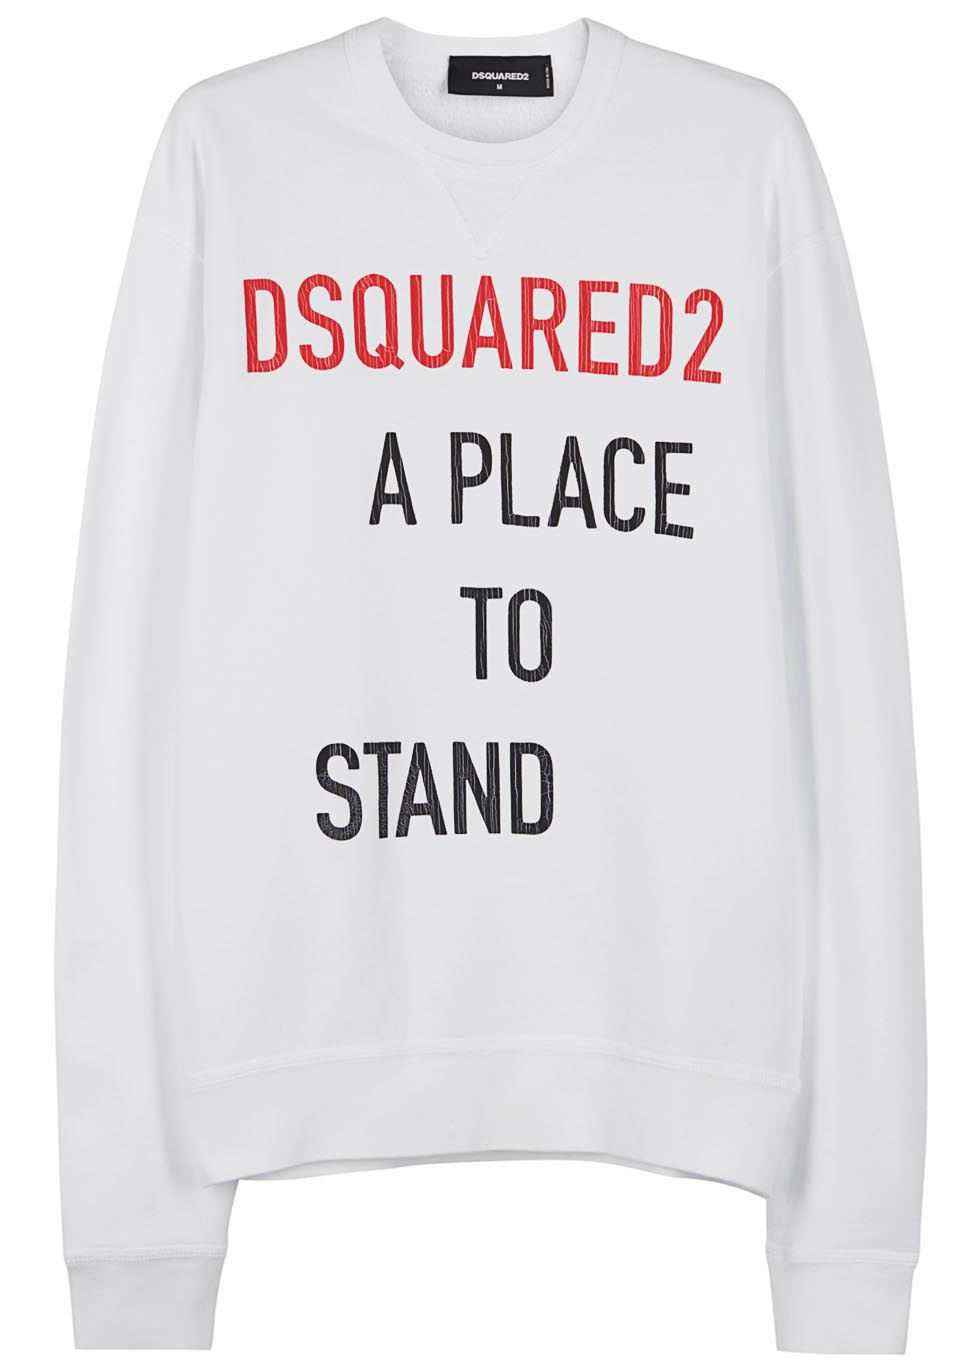 dsquared2 a place to stand - 54% remise - www.muminlerotomotiv.com.tr